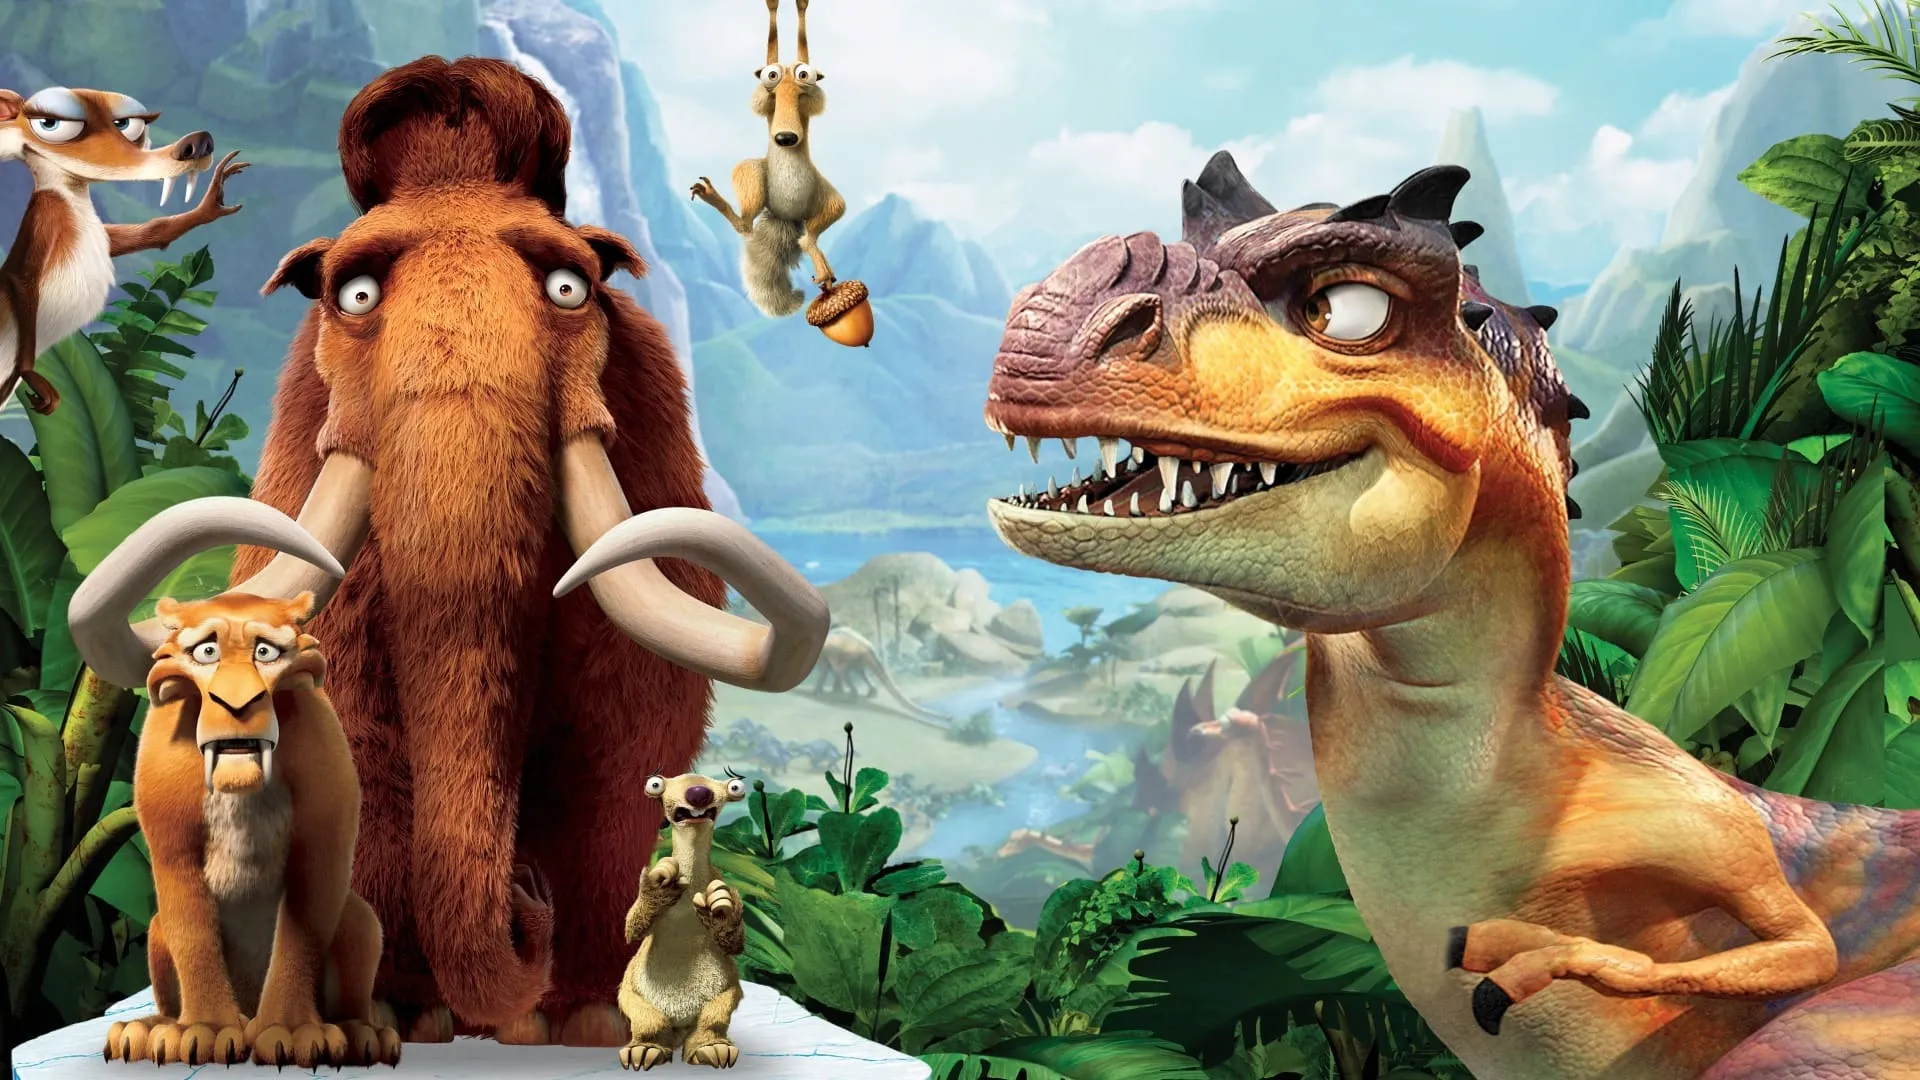 Ice Age: Dawn of the Dinosaurs (NL)